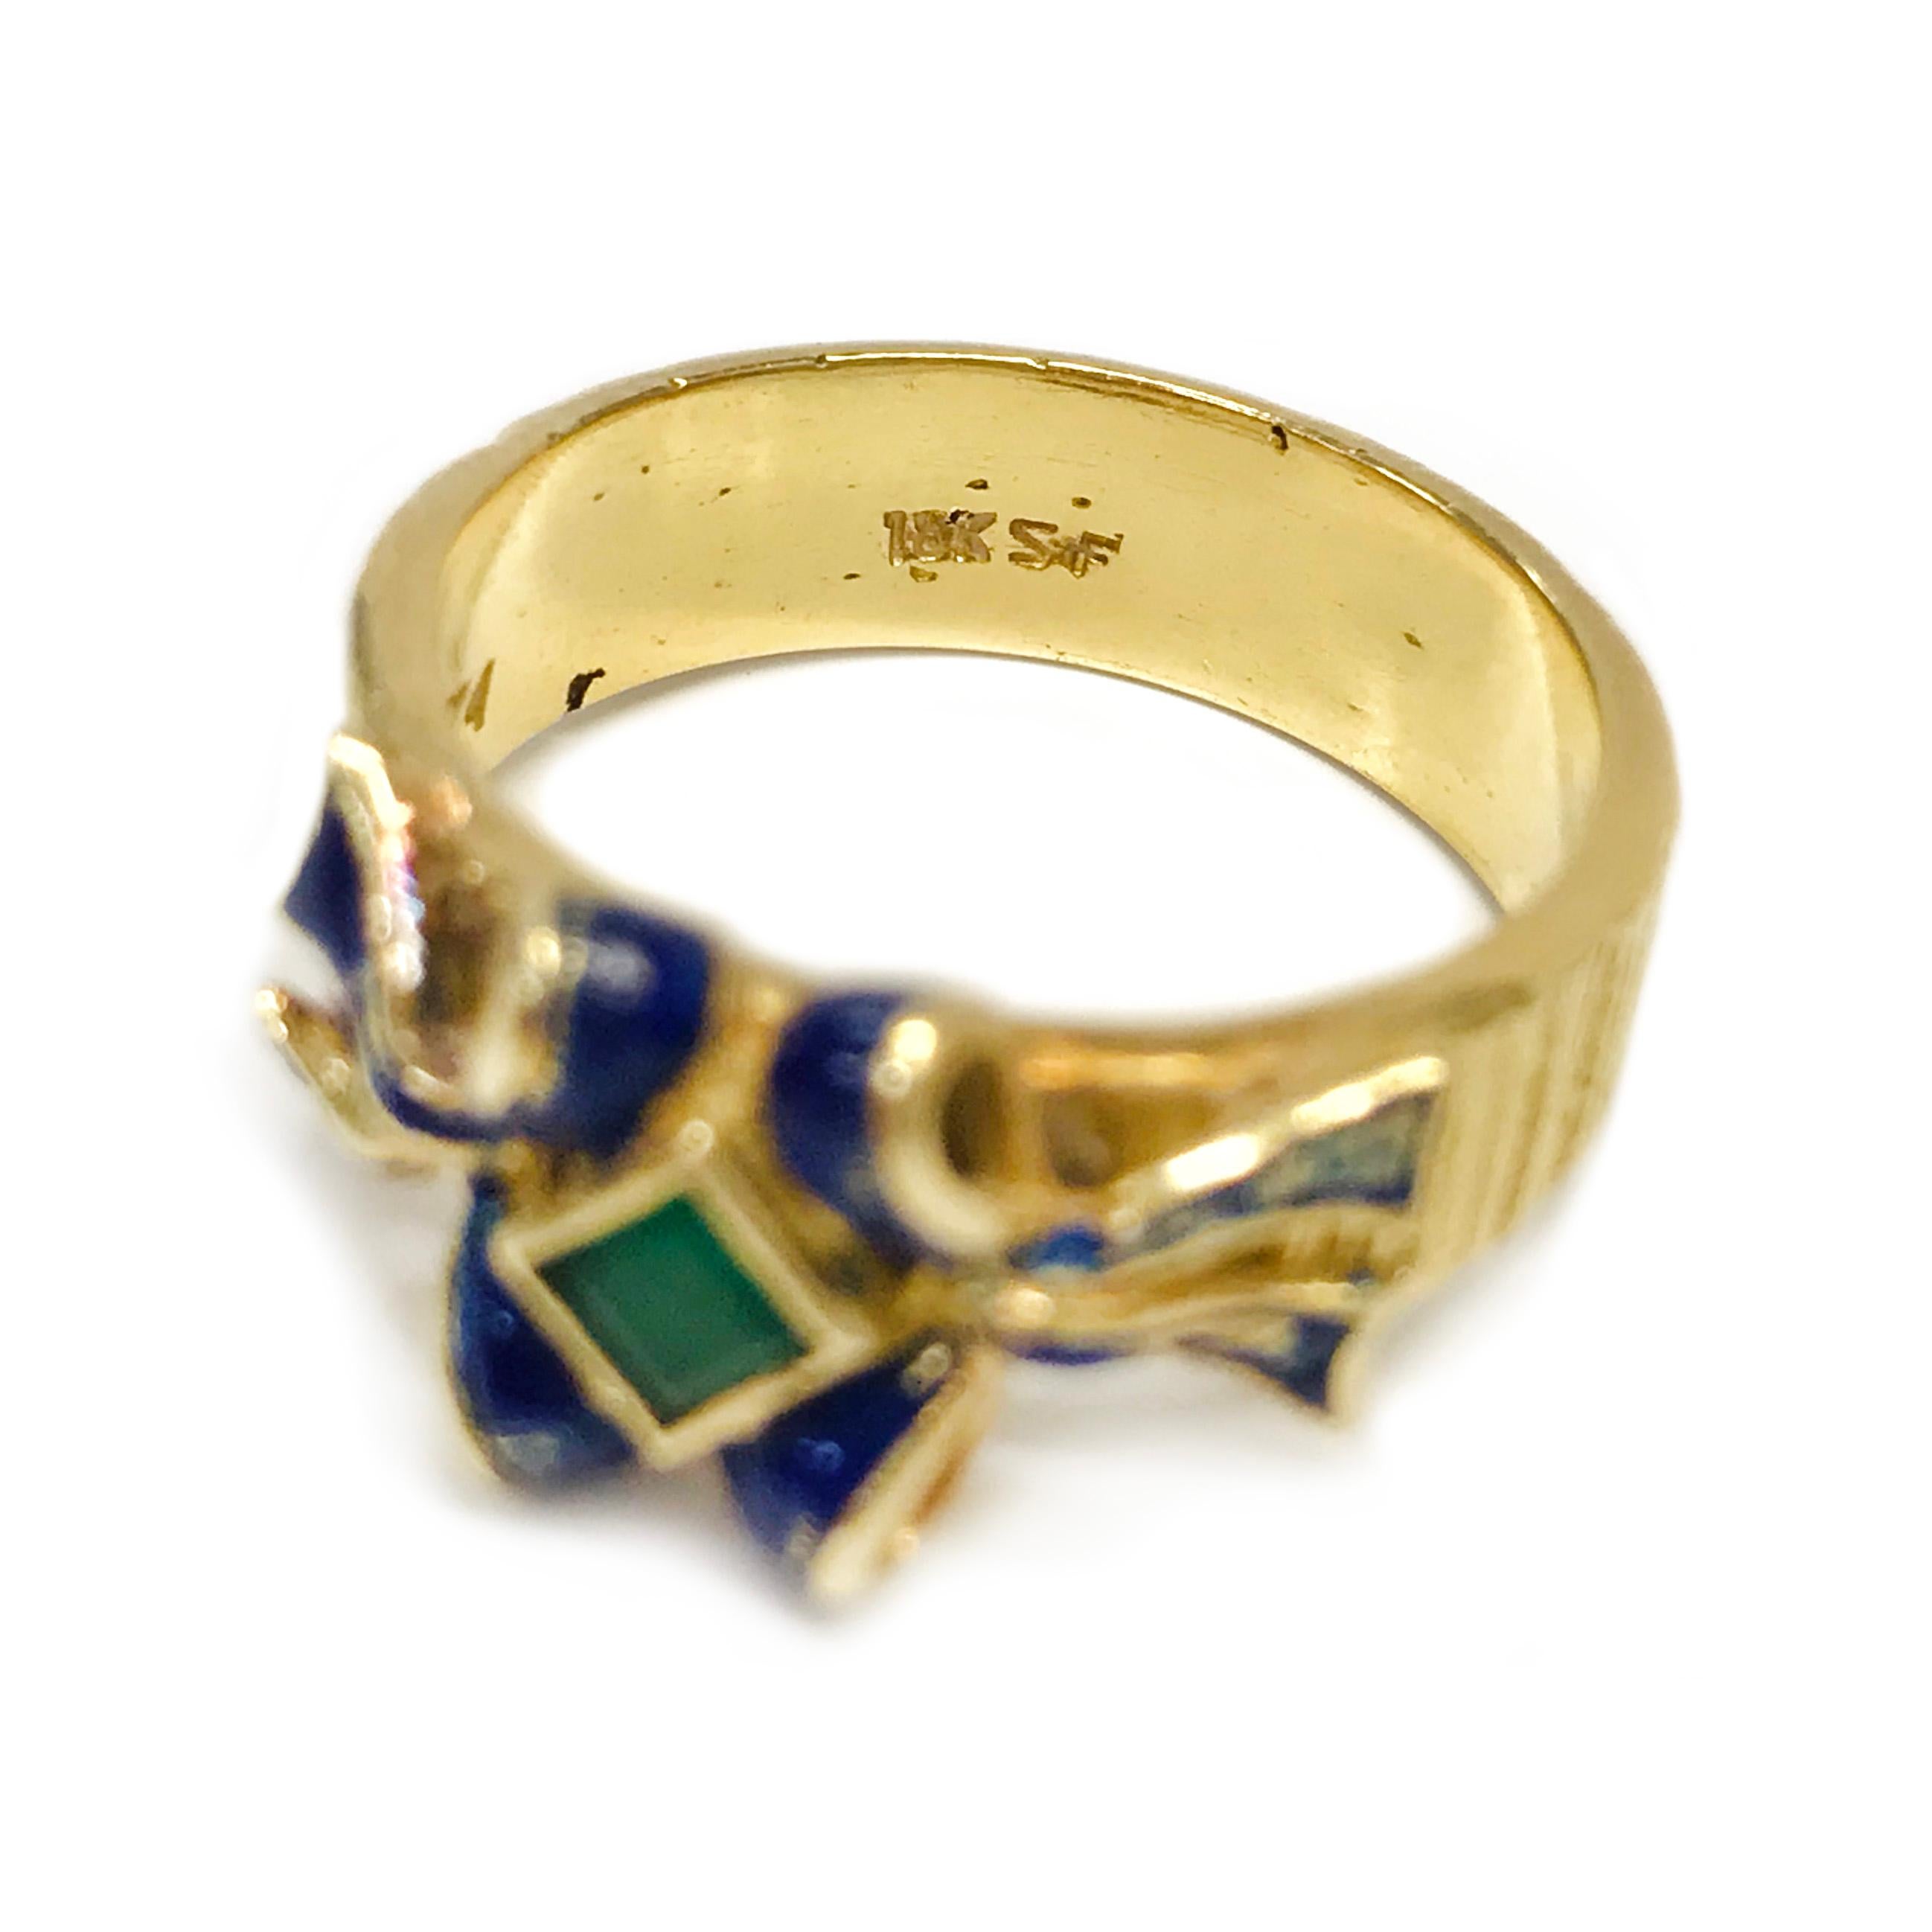 18 Karat Emerald Enamel Ring. The ring features a single square-cut Emerald with side bows accented with blue enamel. The ring band is highly textured with vertical lines. The ring is 22.3mm tall x 19.2mm wide x 8.9mm deep. The ring size is 6.